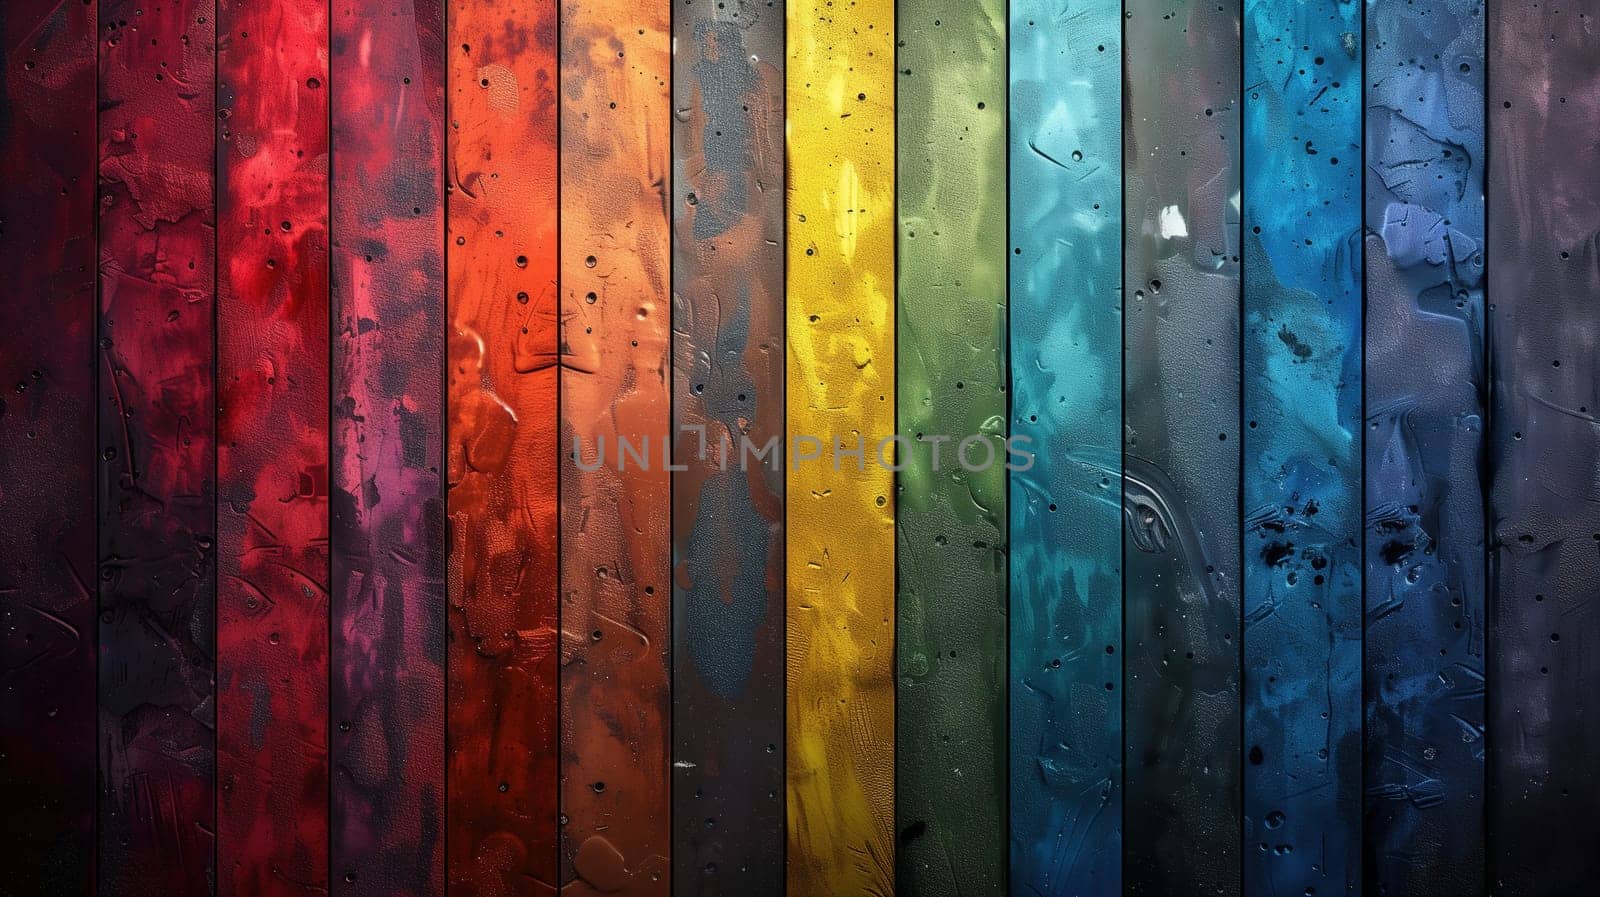 Rainbow Colored Wallpaper With Water Droplets by TRMK